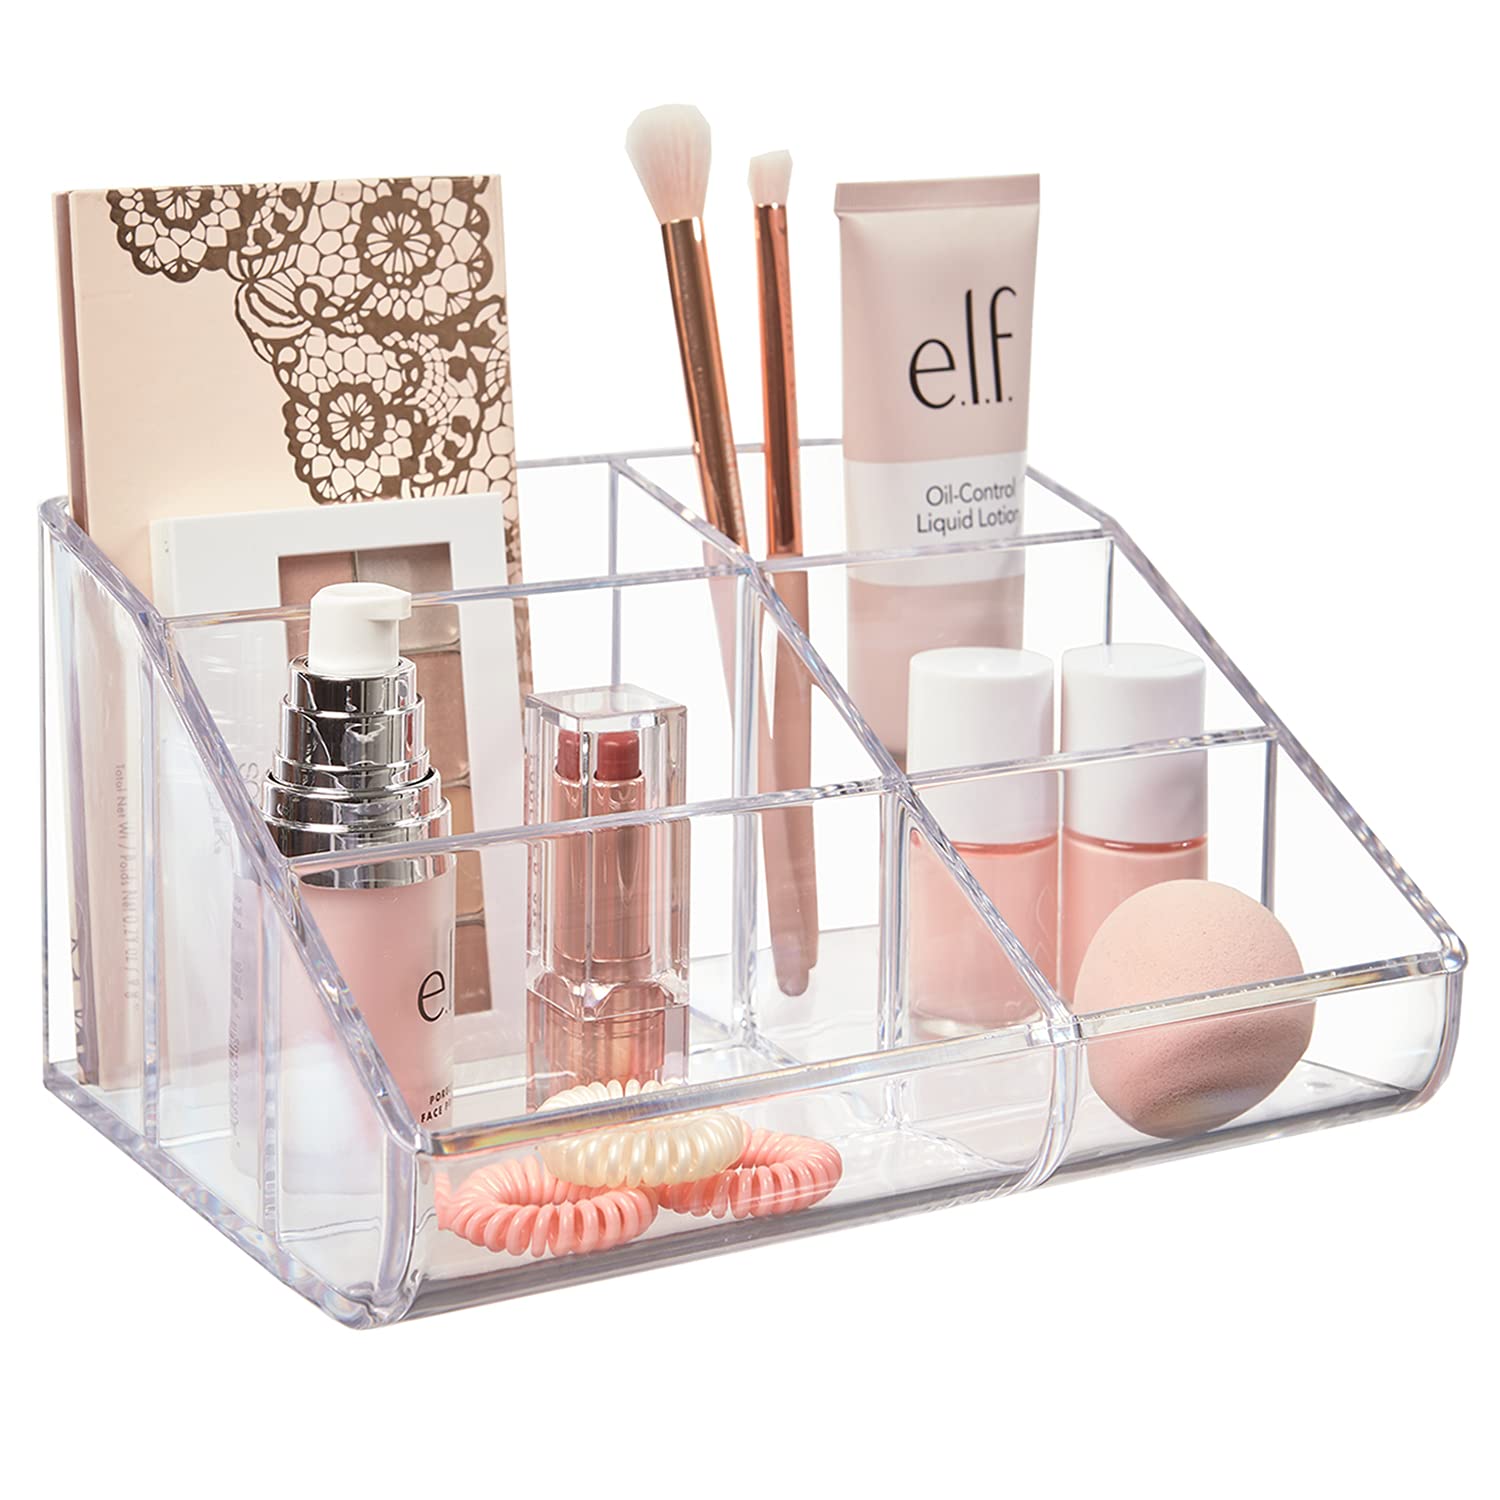 STORi Clear Plastic Vanity Makeup Organizer, Compact Rectangular  4-Compartment Holder for Brushes, Eyeshadow Palettes, & Beauty Supplies